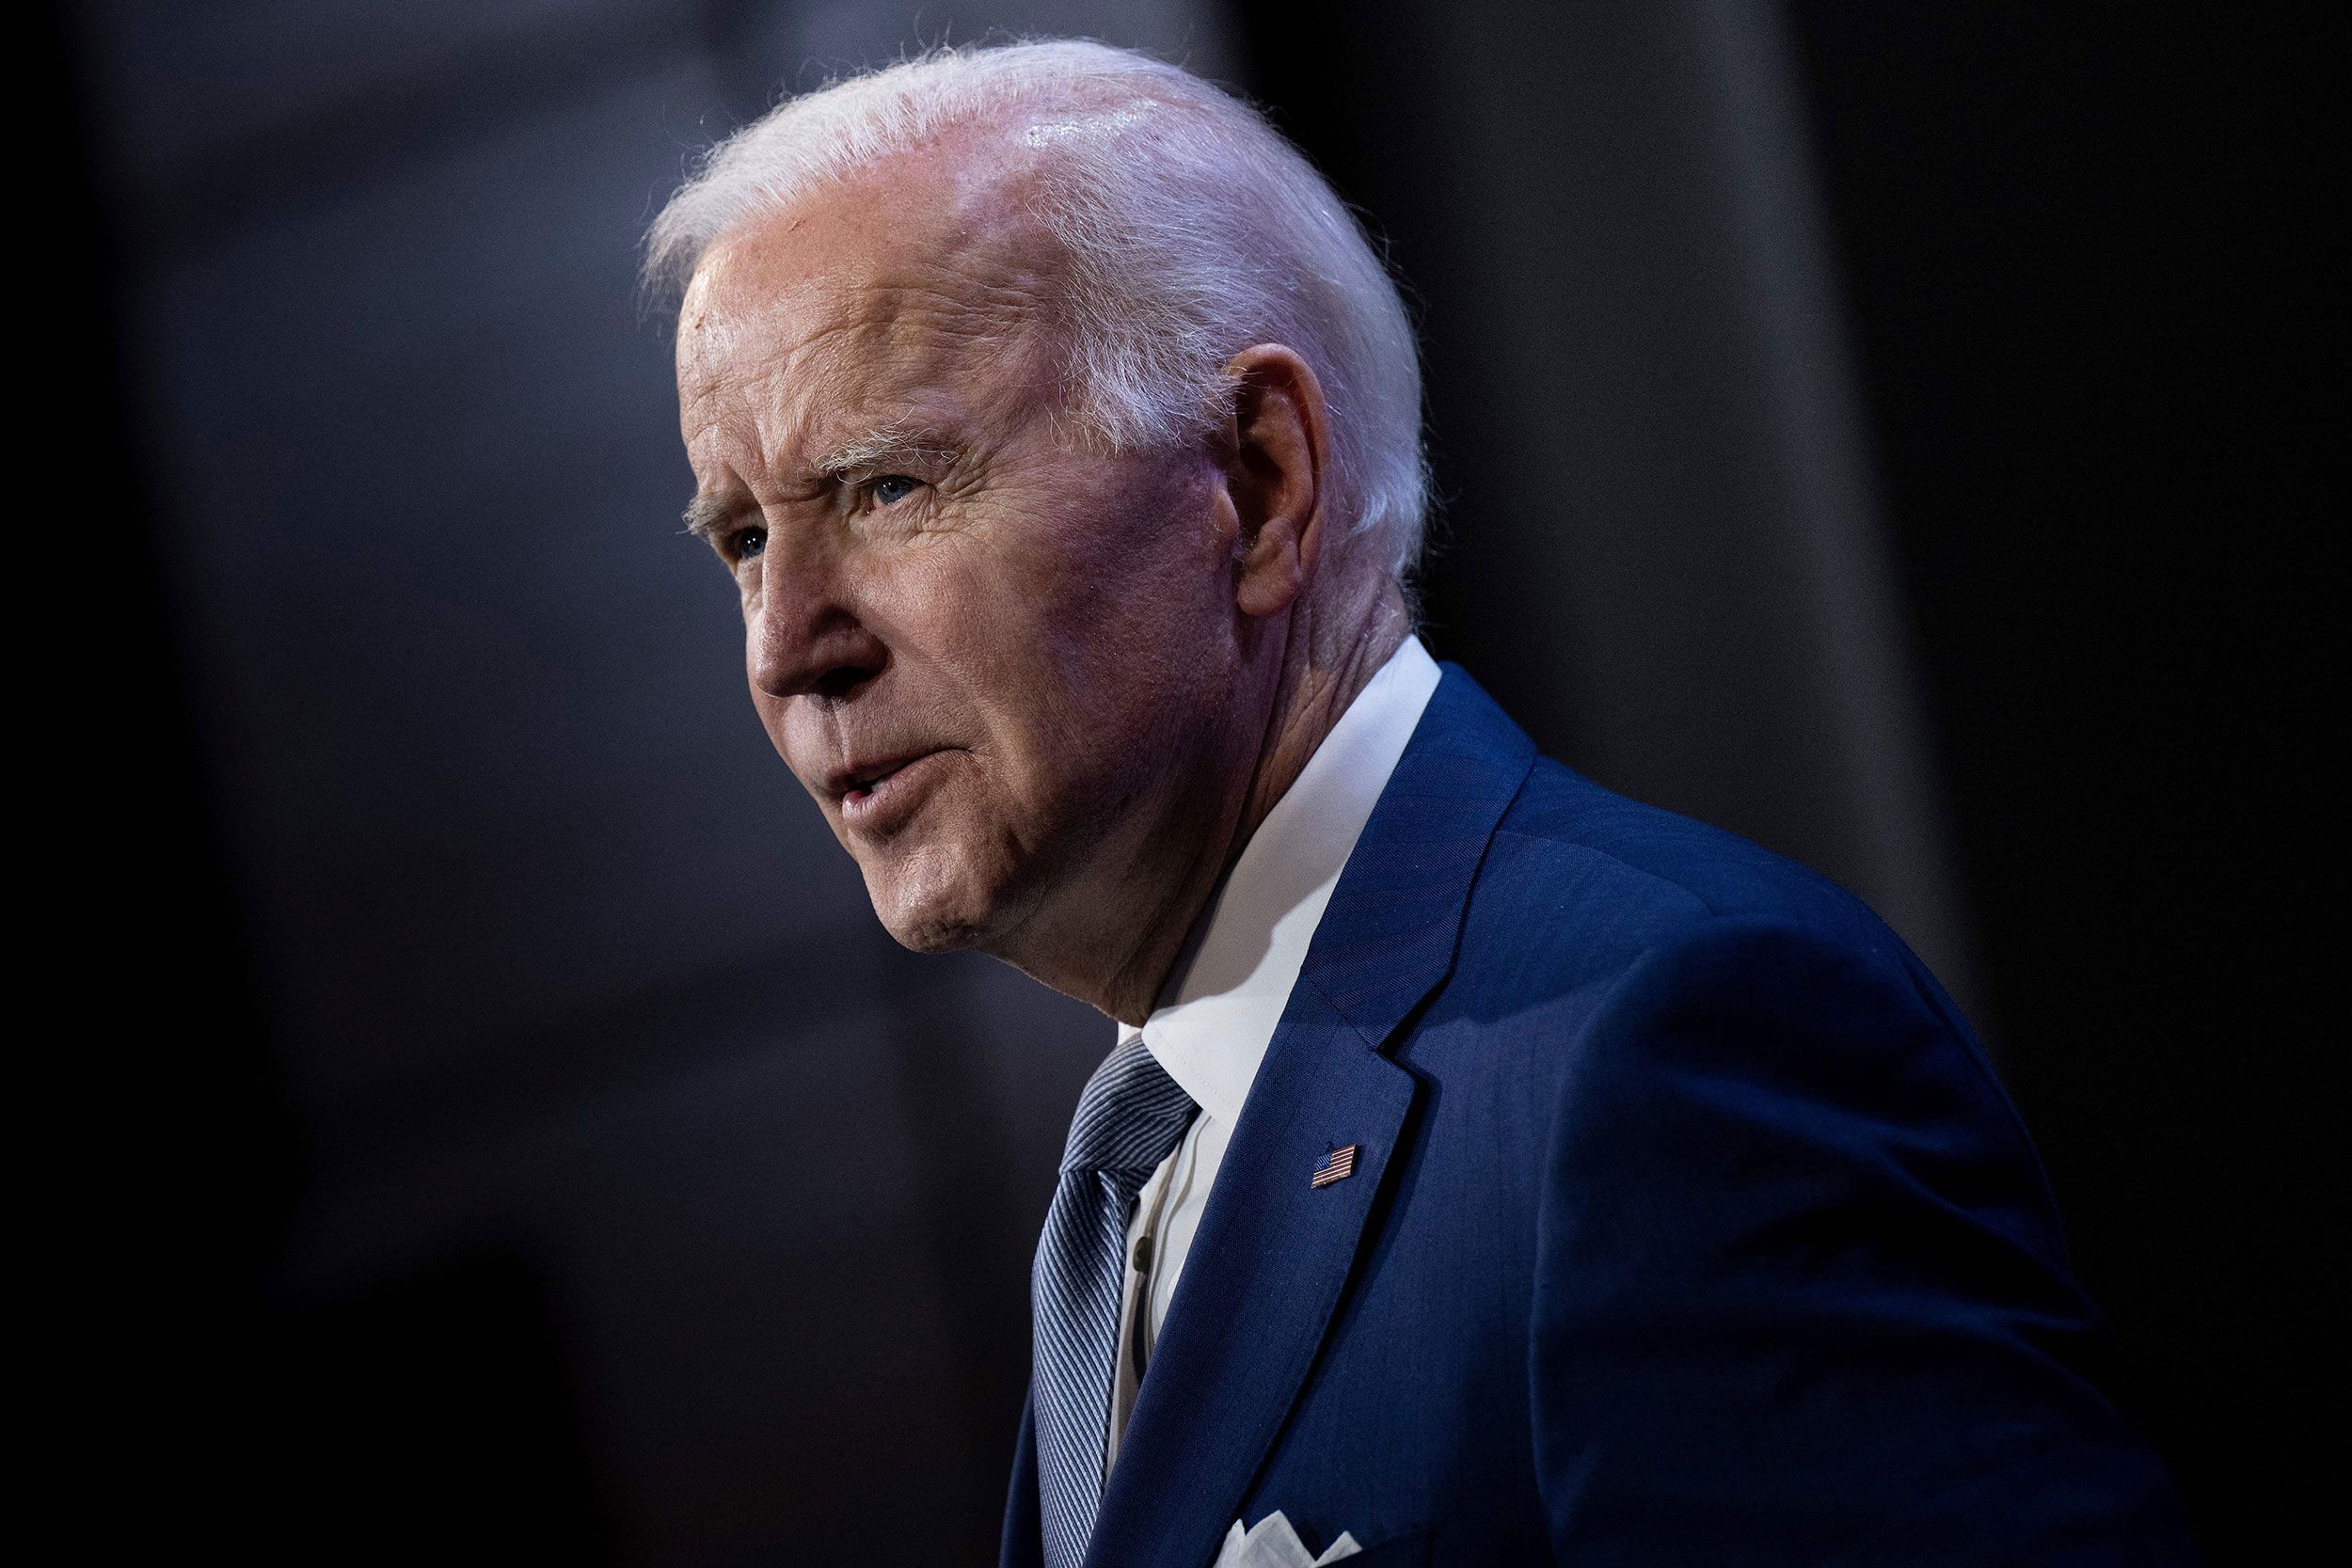 INSIGHT Biden's pledges could spur more migration. But in a pandemic, the  border is unprepared